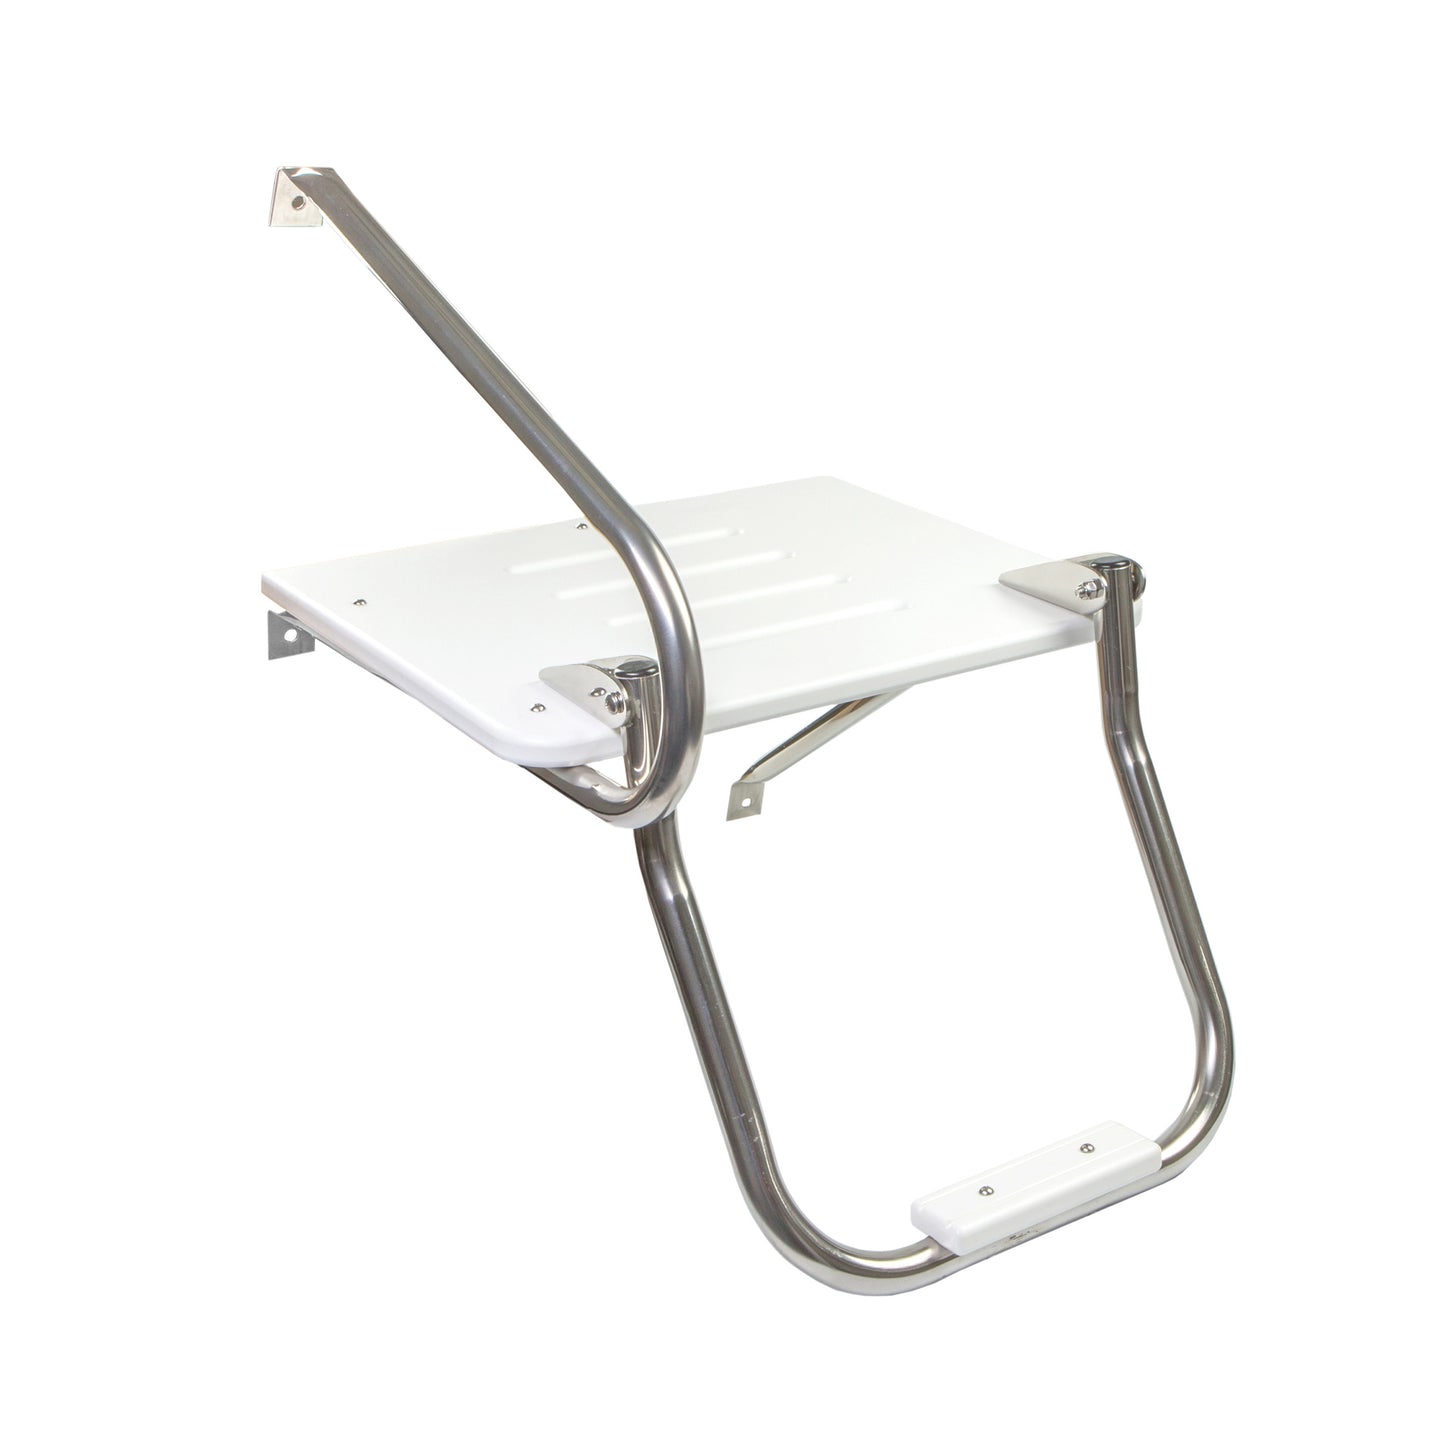 White Poly Swim Platform with Ladder and Mounting Hardware for Boats with Outboard Motors